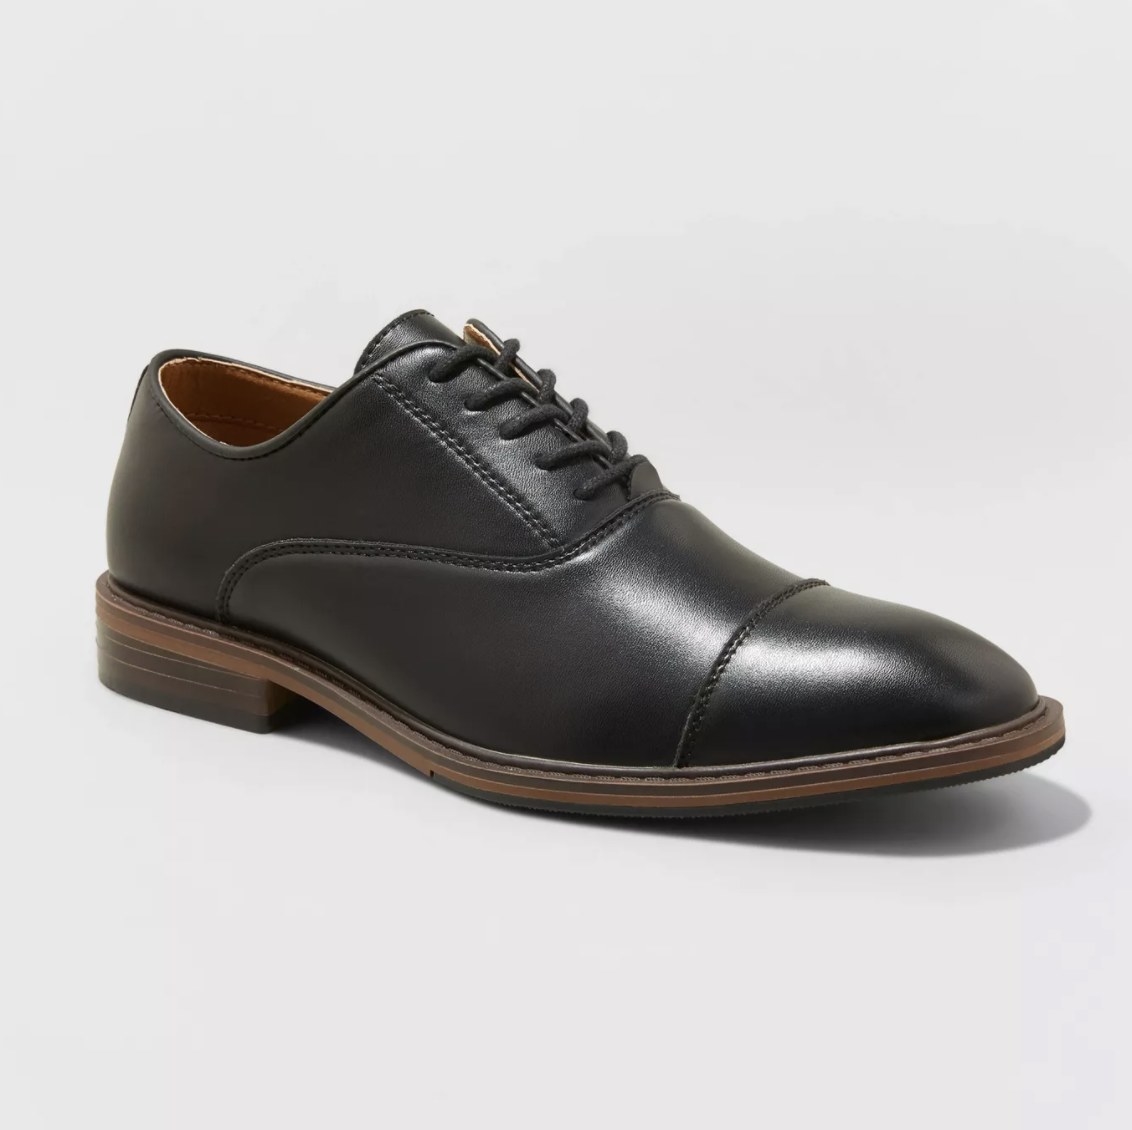 The black oxford shoes have a shiny exterior and a wooden sole